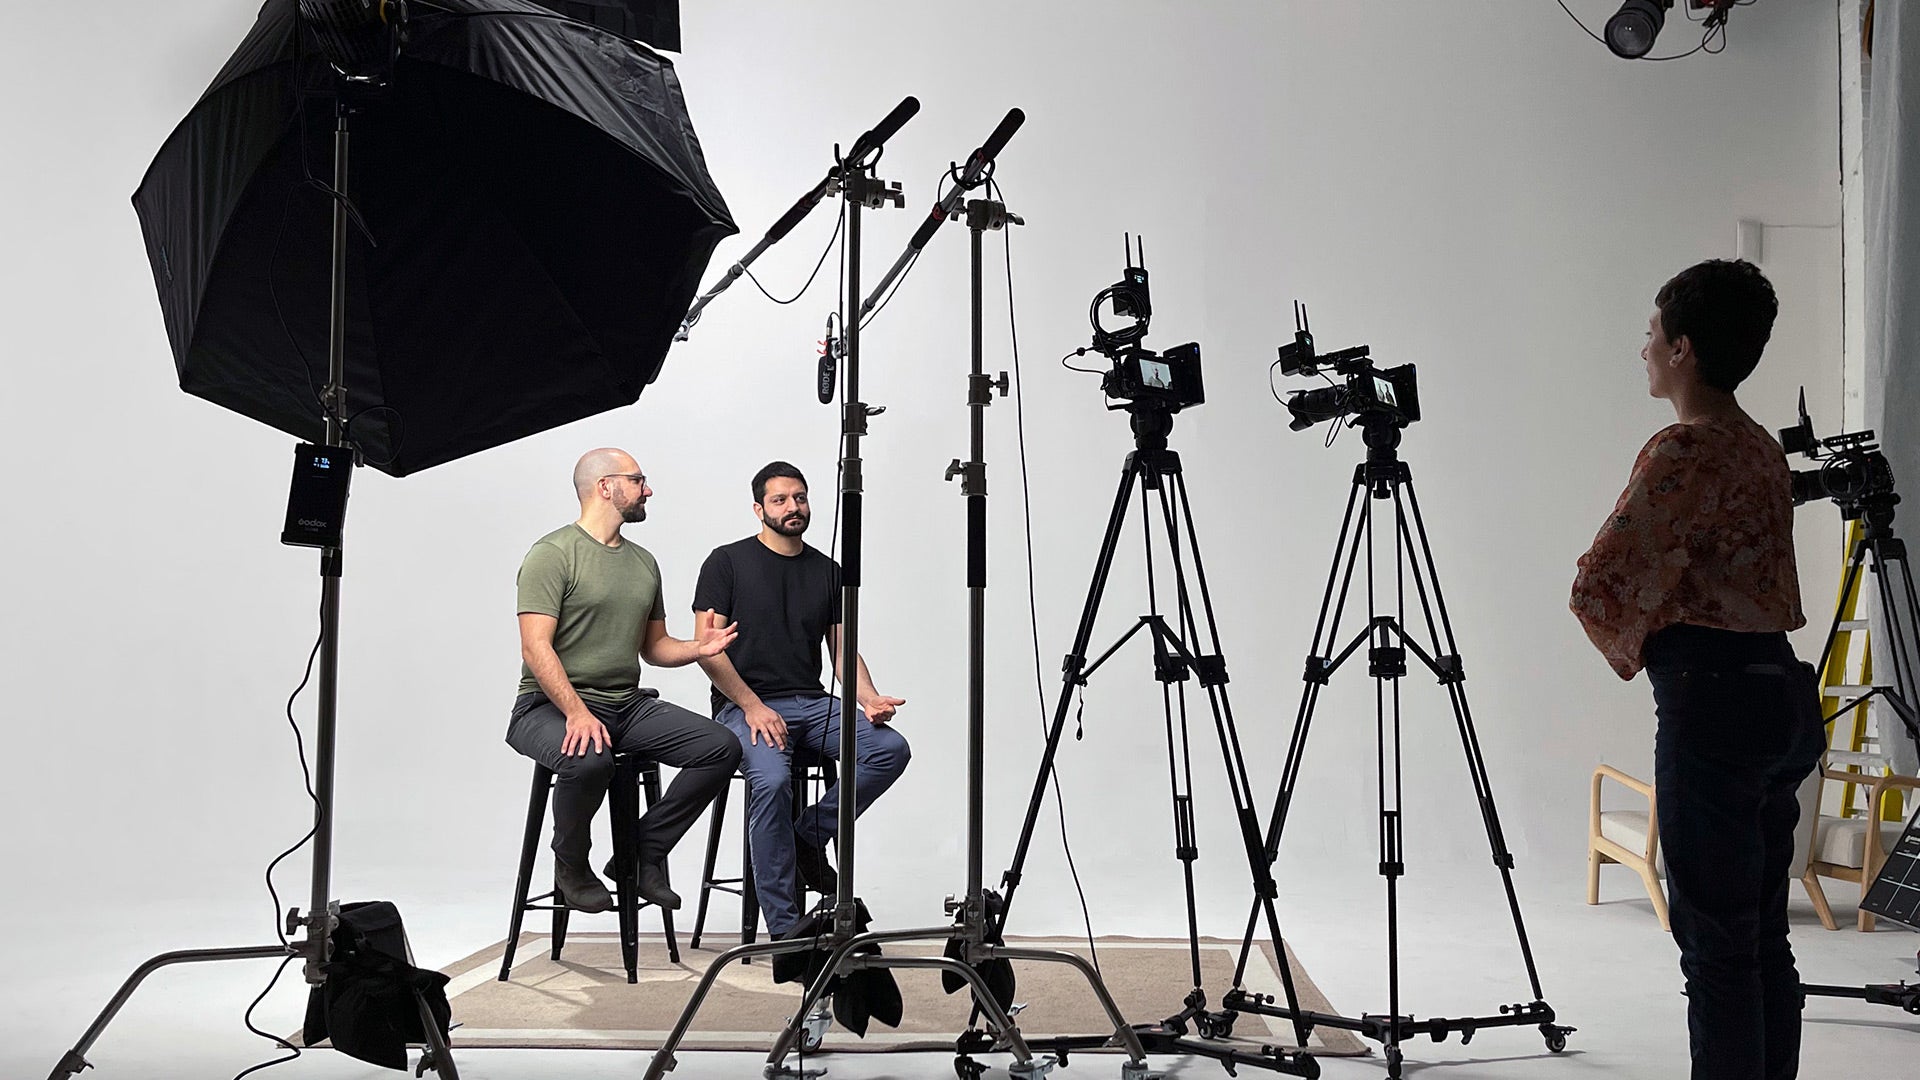 Load video: StartWell&#39;s film production studio offering provides an integrated approach at affordable rates in downtown Toronto